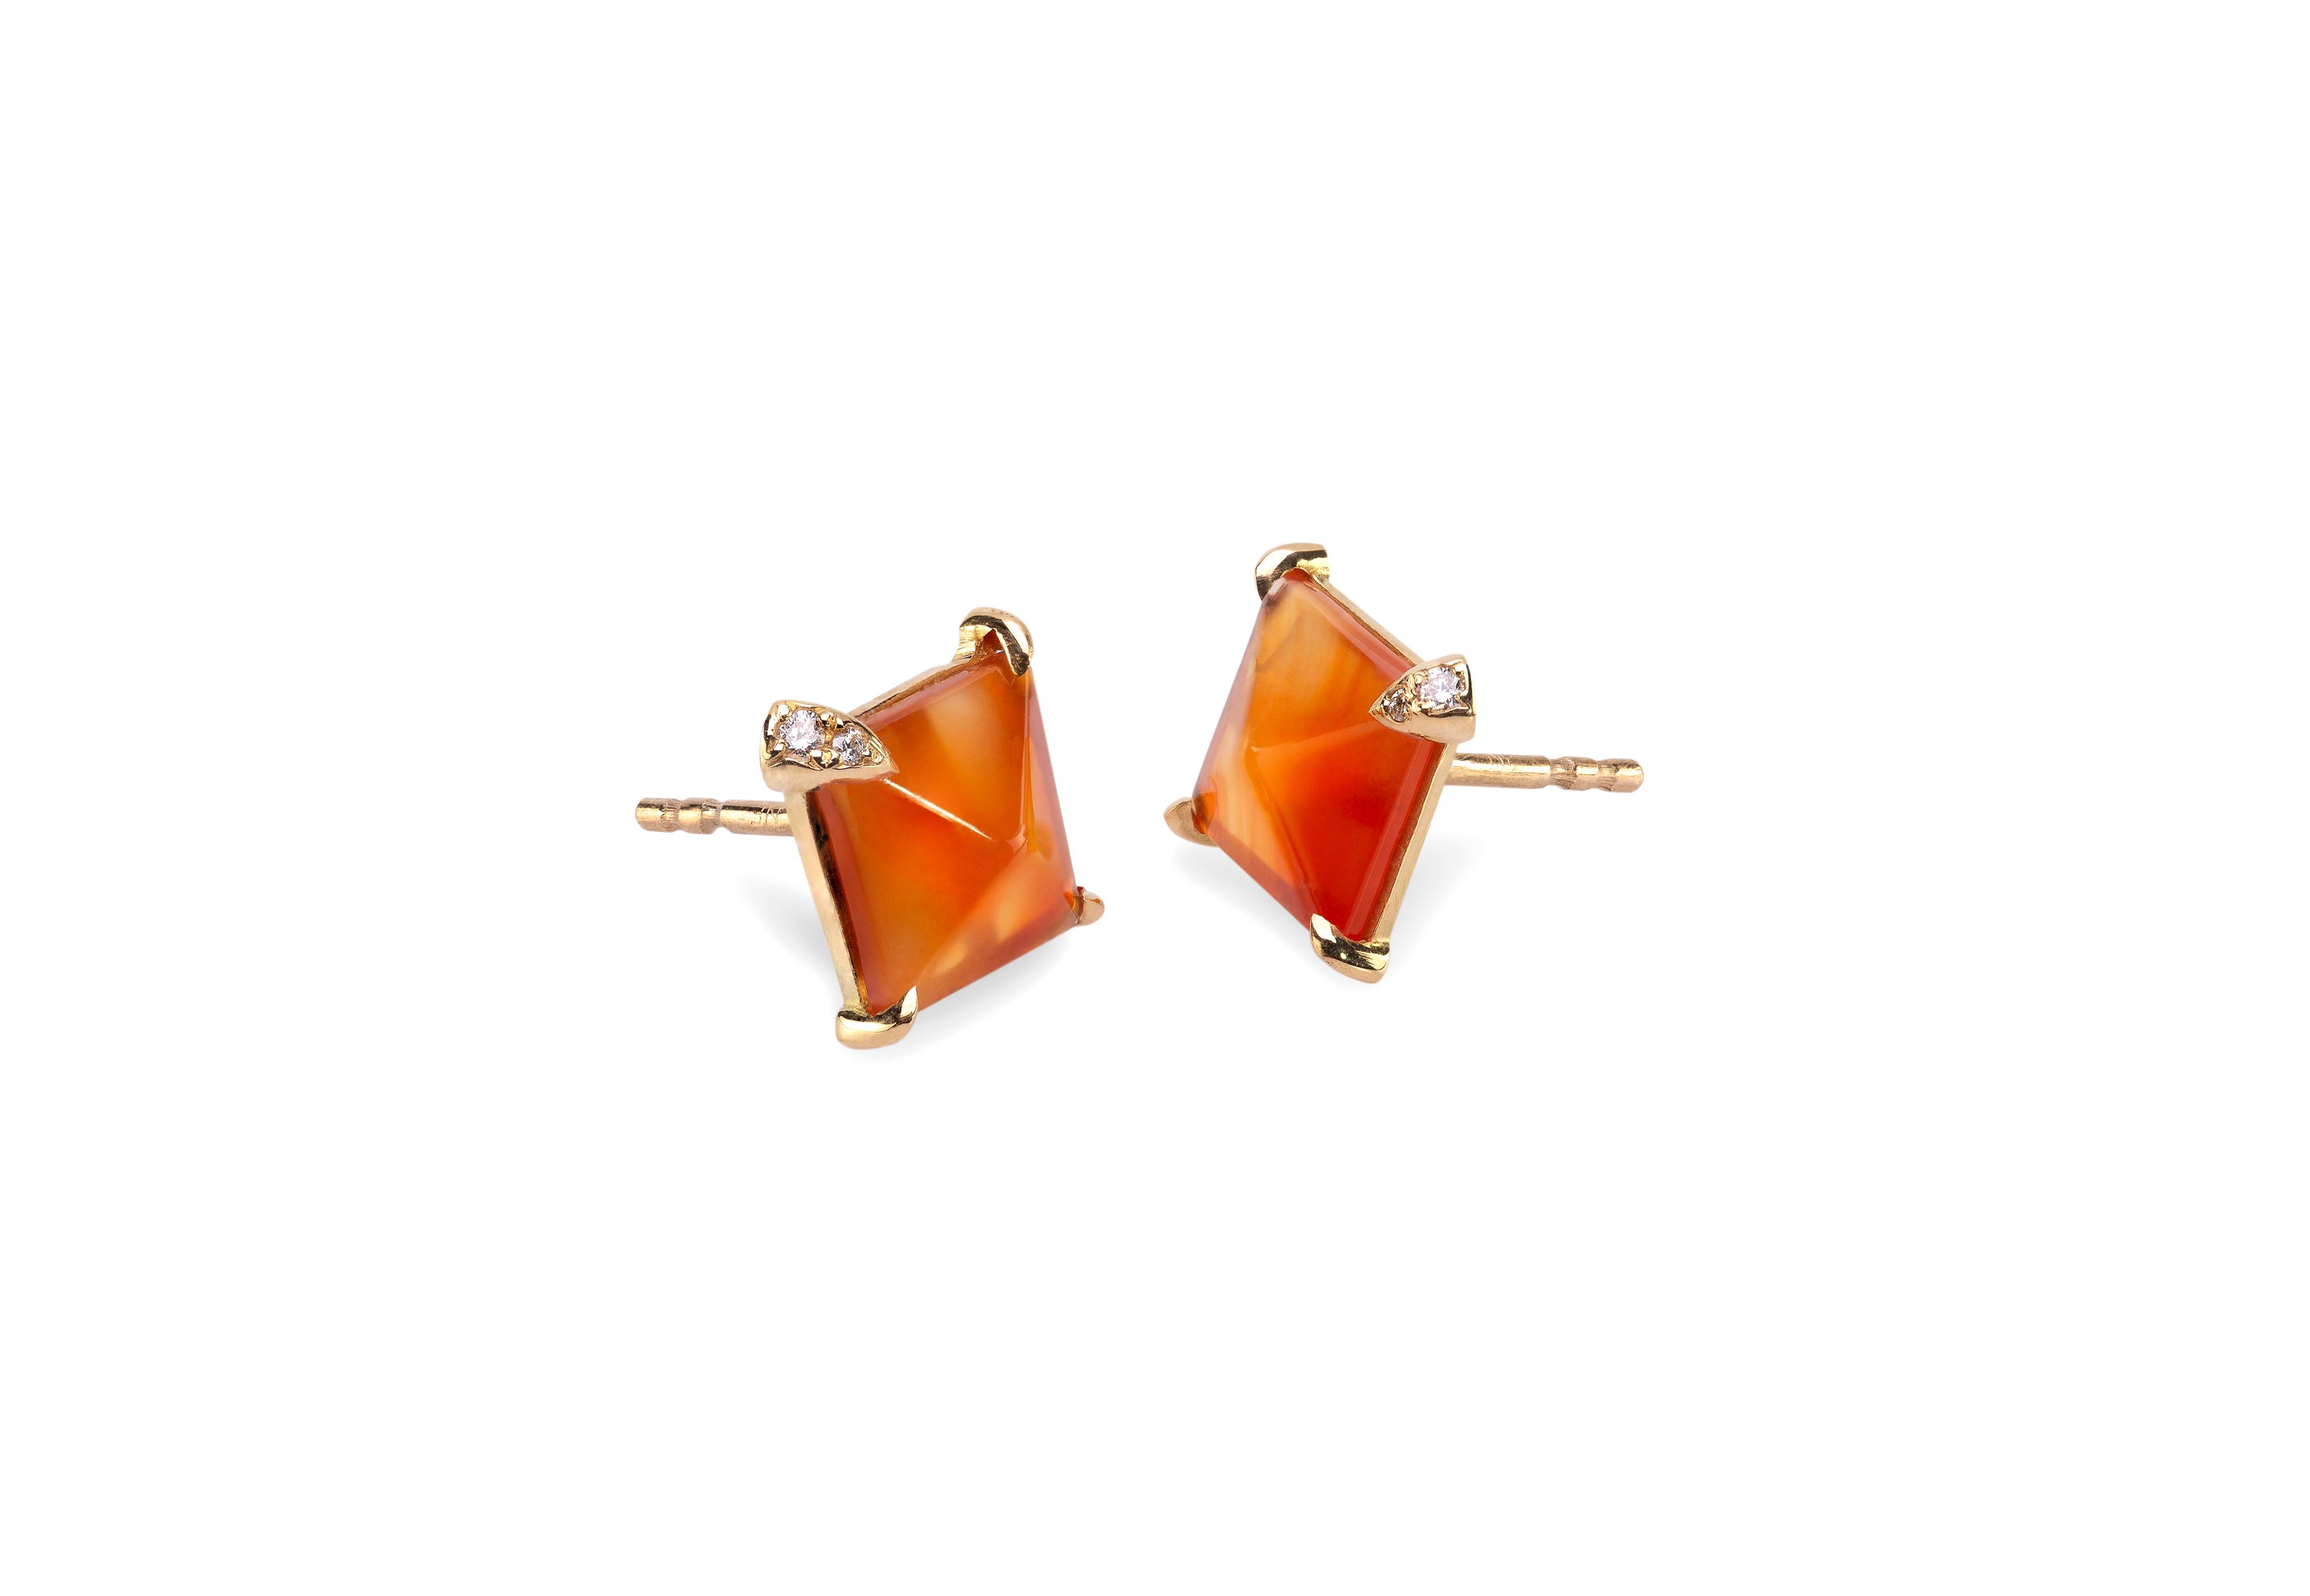 Brilliant Cut 18 Carat Yellow Gold White Diamonds Carnelian Handcrafted Stud Design Earring For Sale